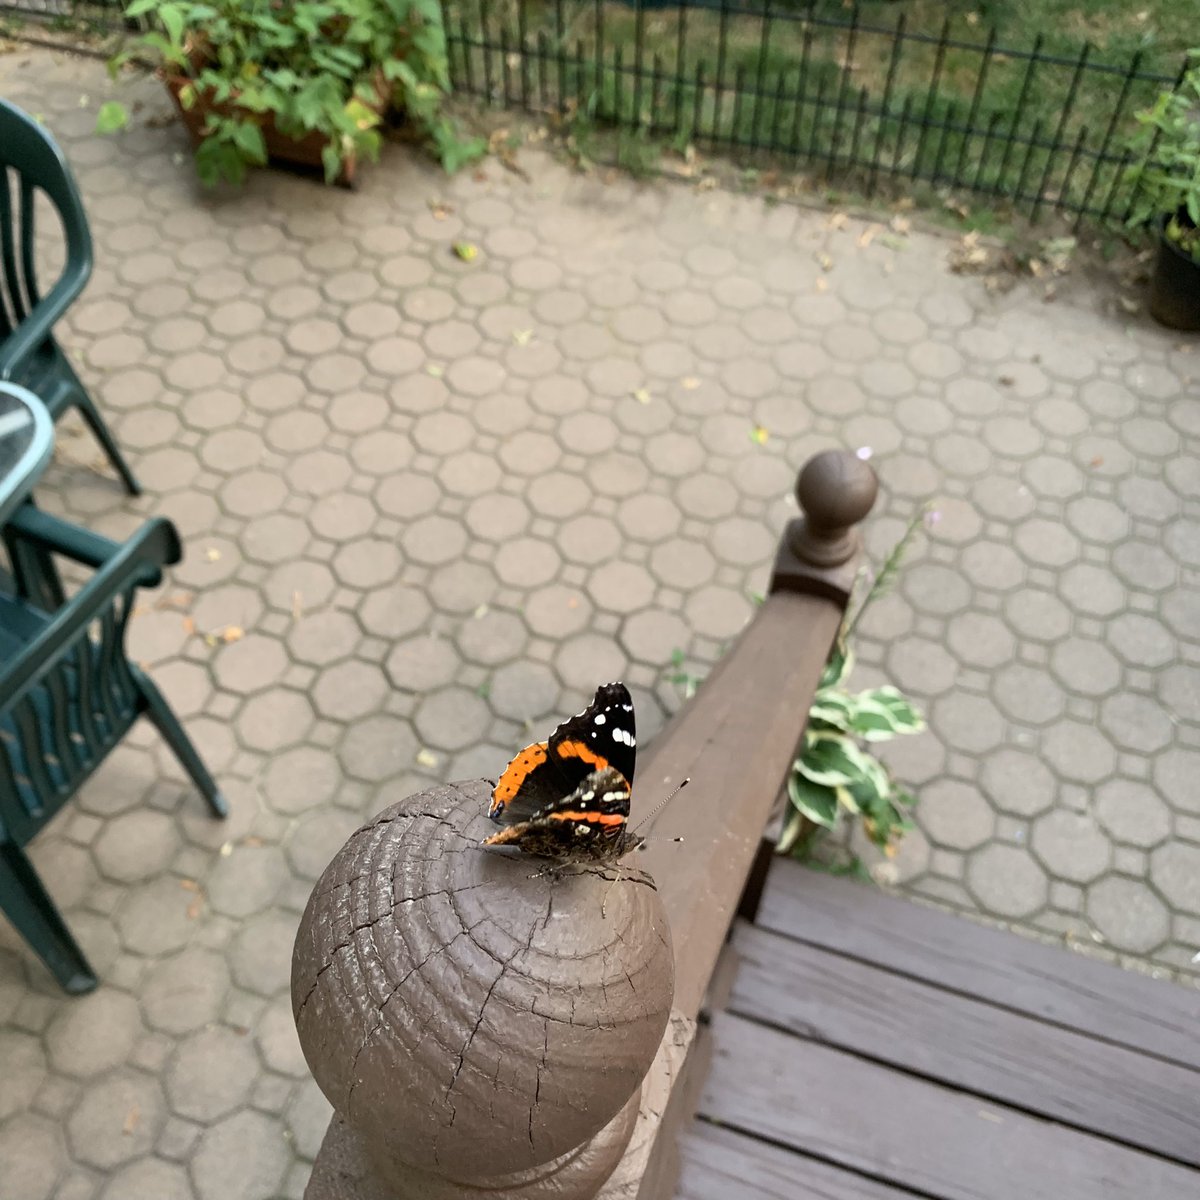 this is the black-swallowtail butterfly we had in the yard last year so i’ll keep this thread updated on its stages (p.s they like parsley)